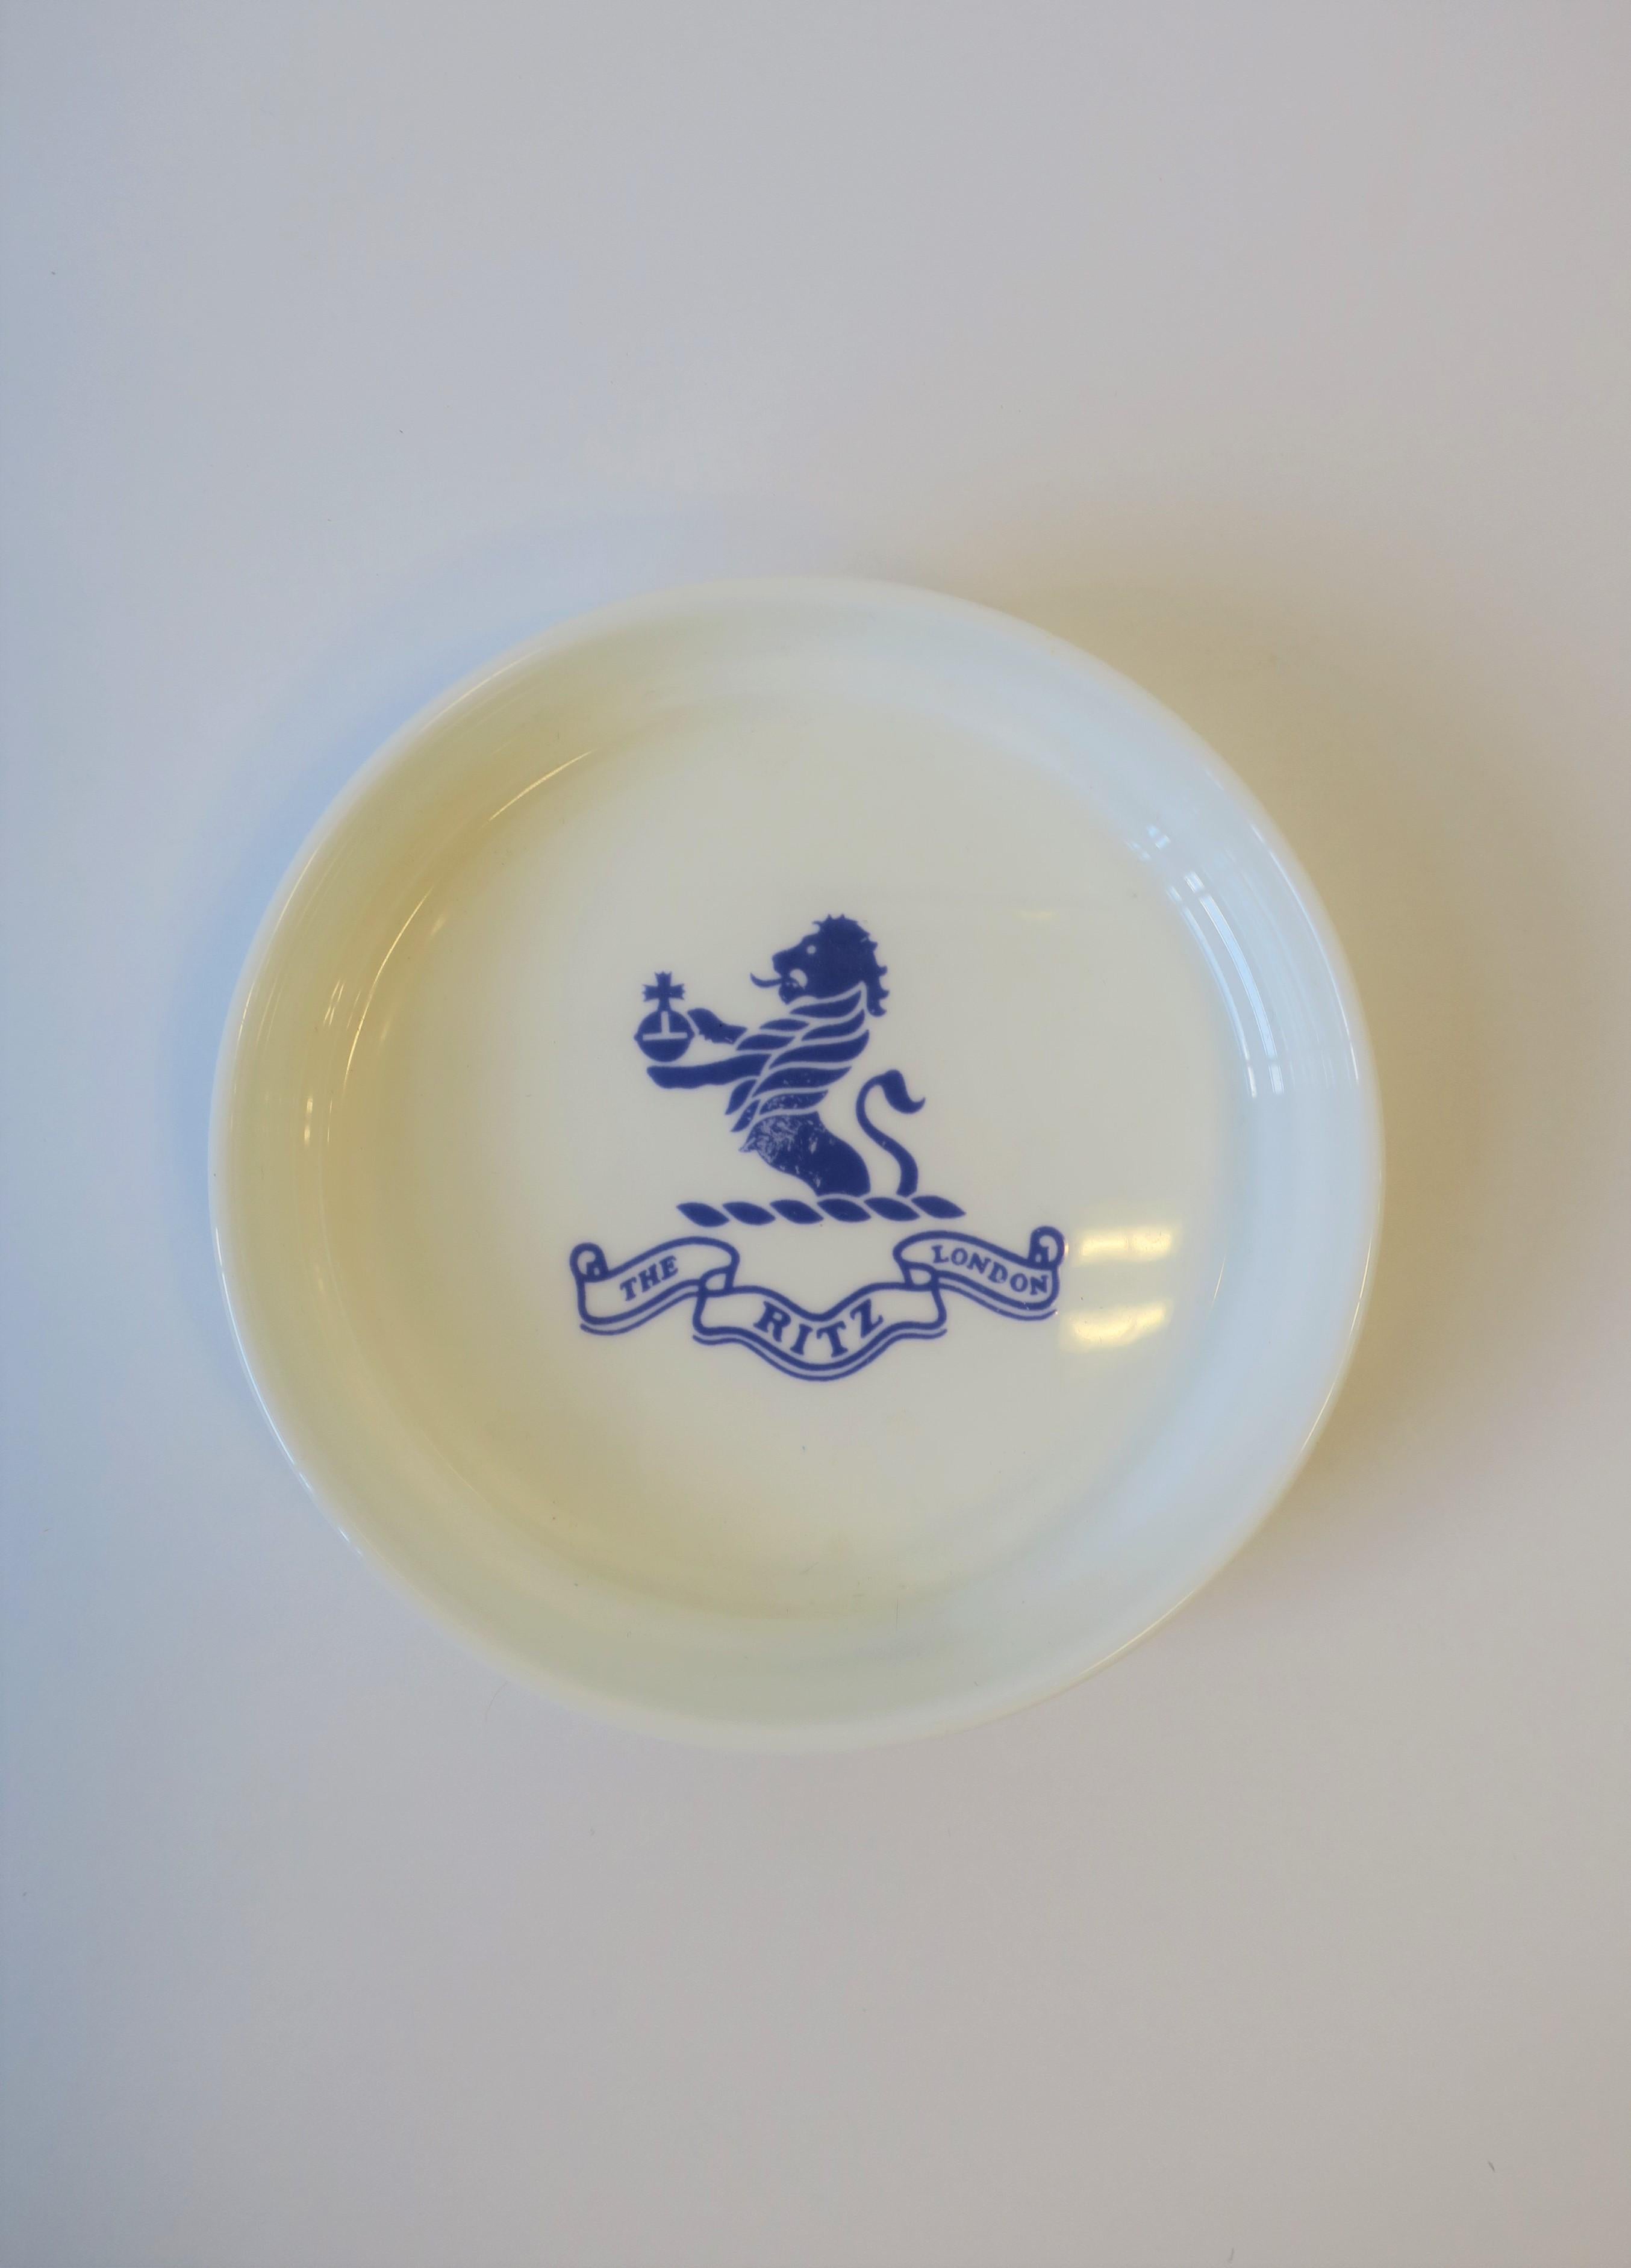 From 'The Ritz London' a round blue and white porcelain jewelry dish with Lion crest detail. Piece also makes a great catch-all for desk, vanity, nightstand area, etc. Piece is fine bone-china porcelain made by Royal Daulton, England, as marked on